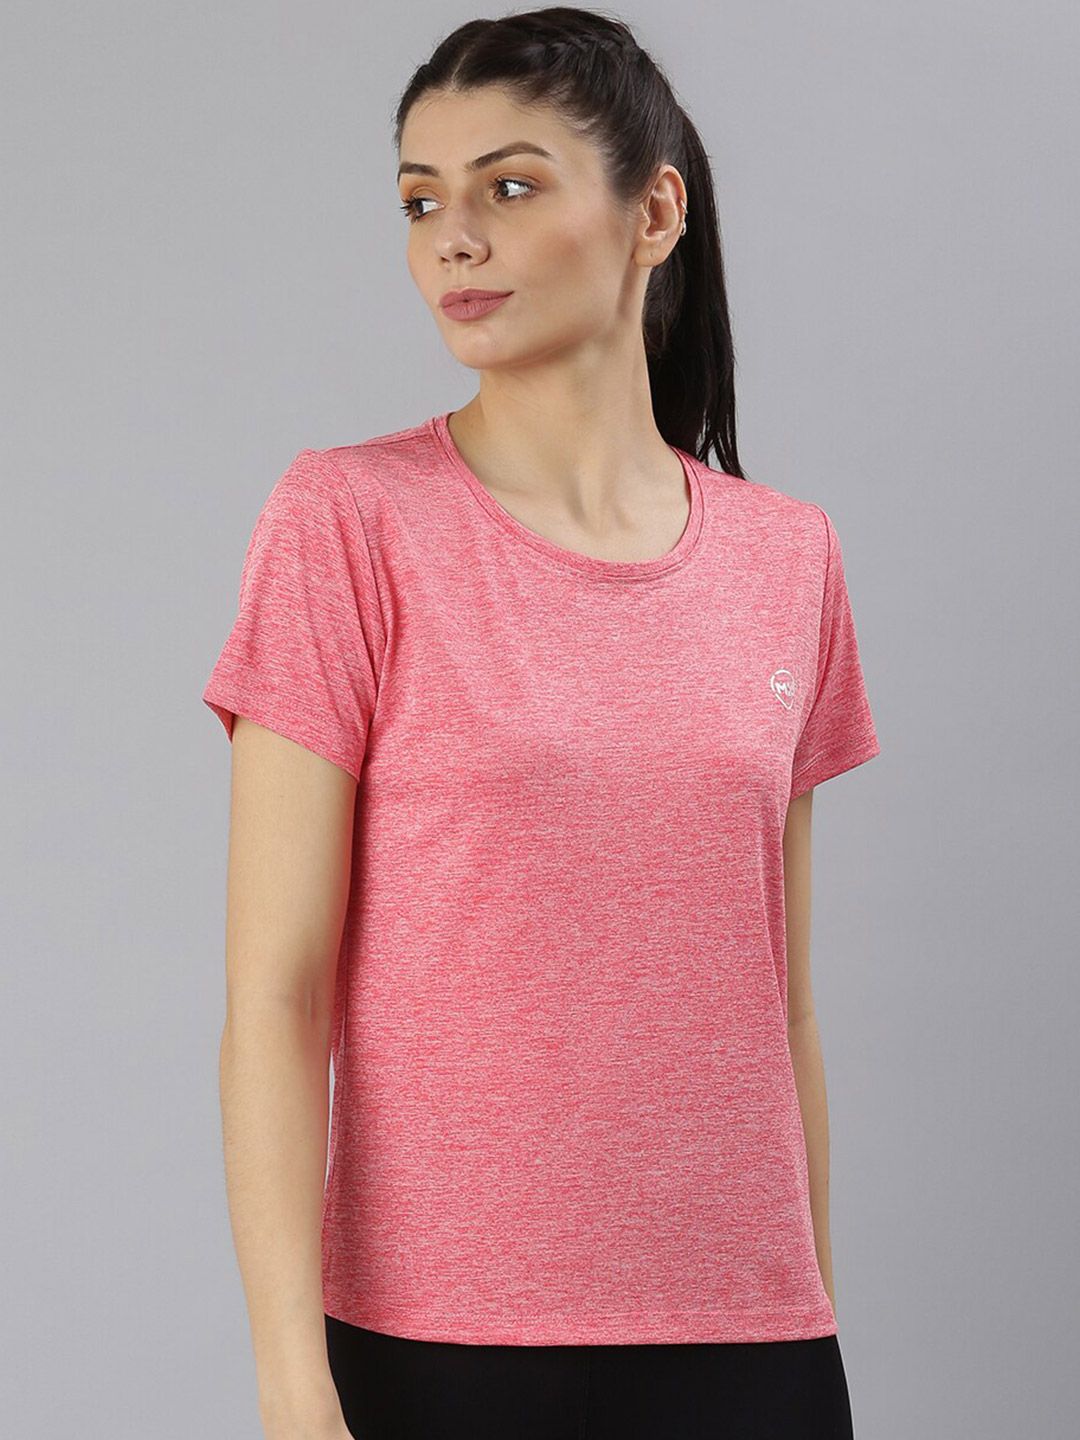 MKH Women Coral Dri-FIT T-shirt Price in India